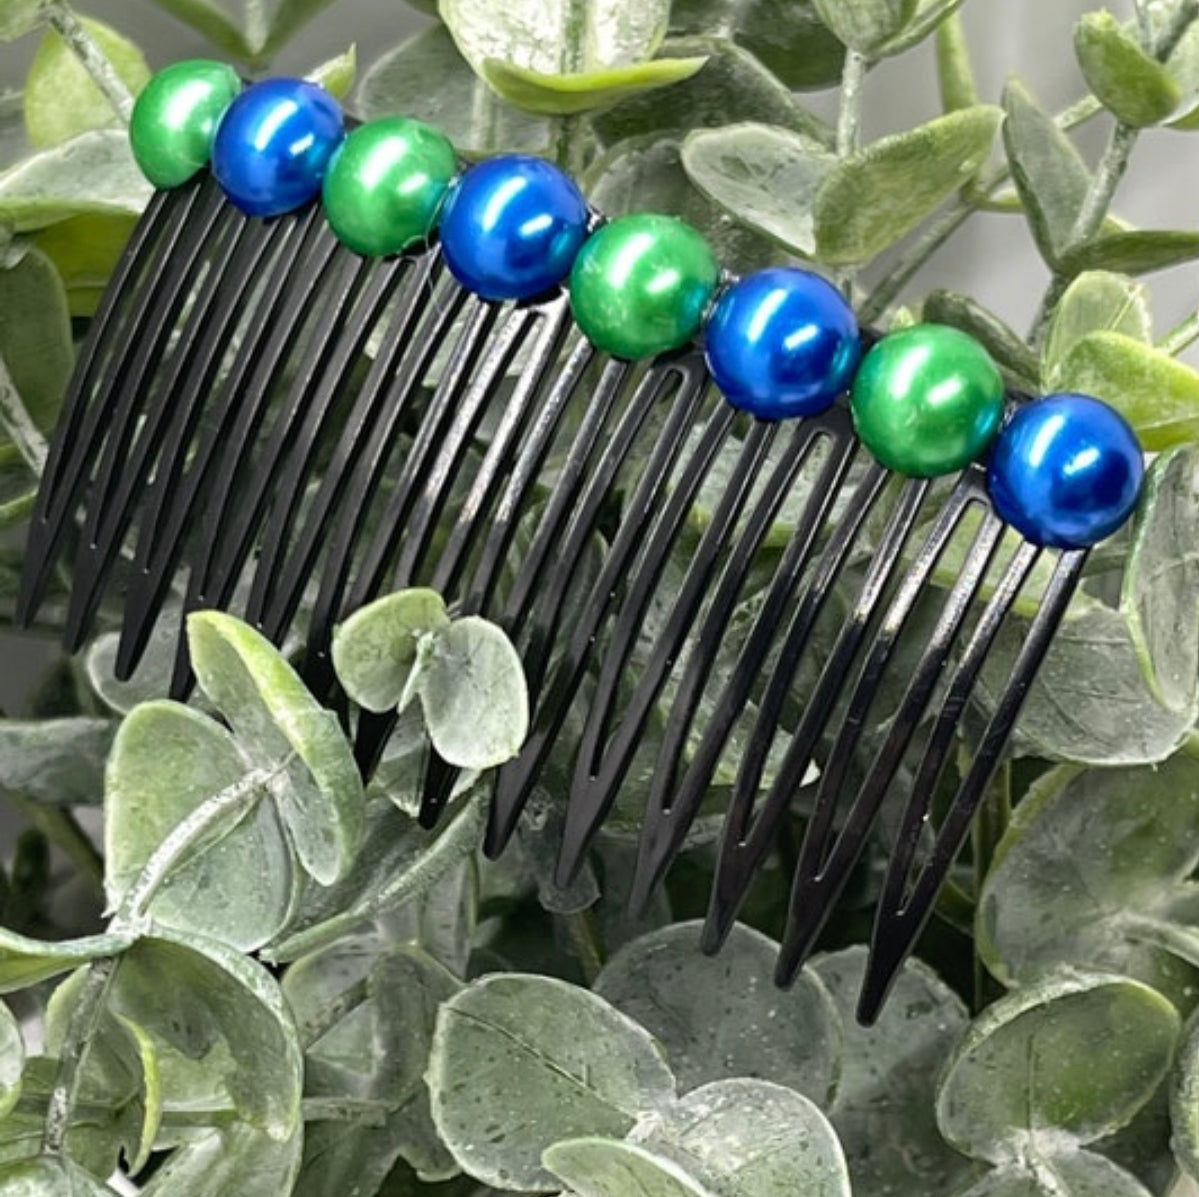 Royal blue Green faux pearl side comb approximately 3.5” long black plastic hair accessory bridal wedding Retro